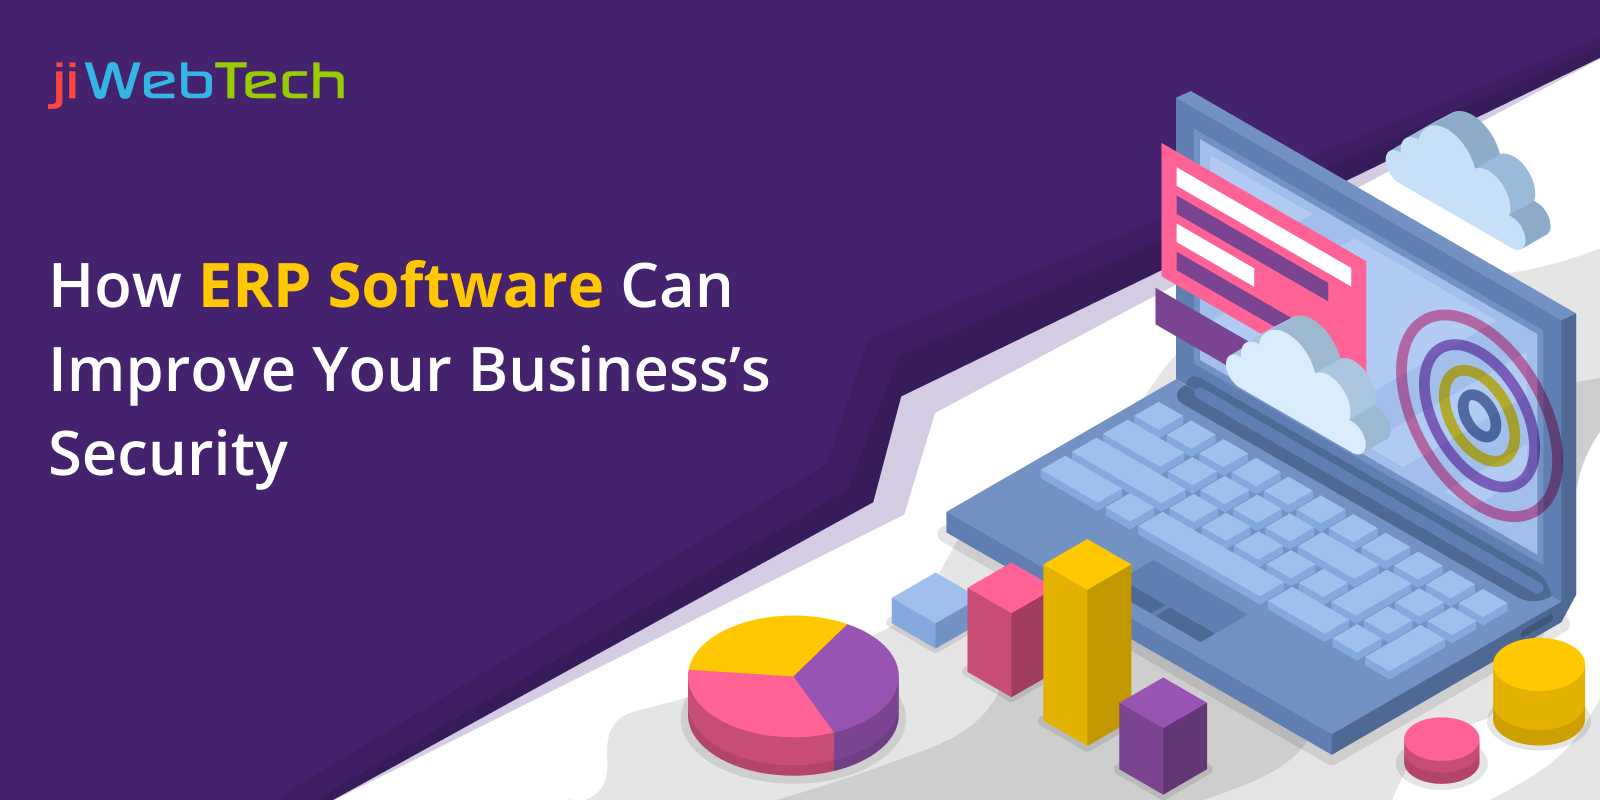 How ERP Software Can Improve Your Business Security